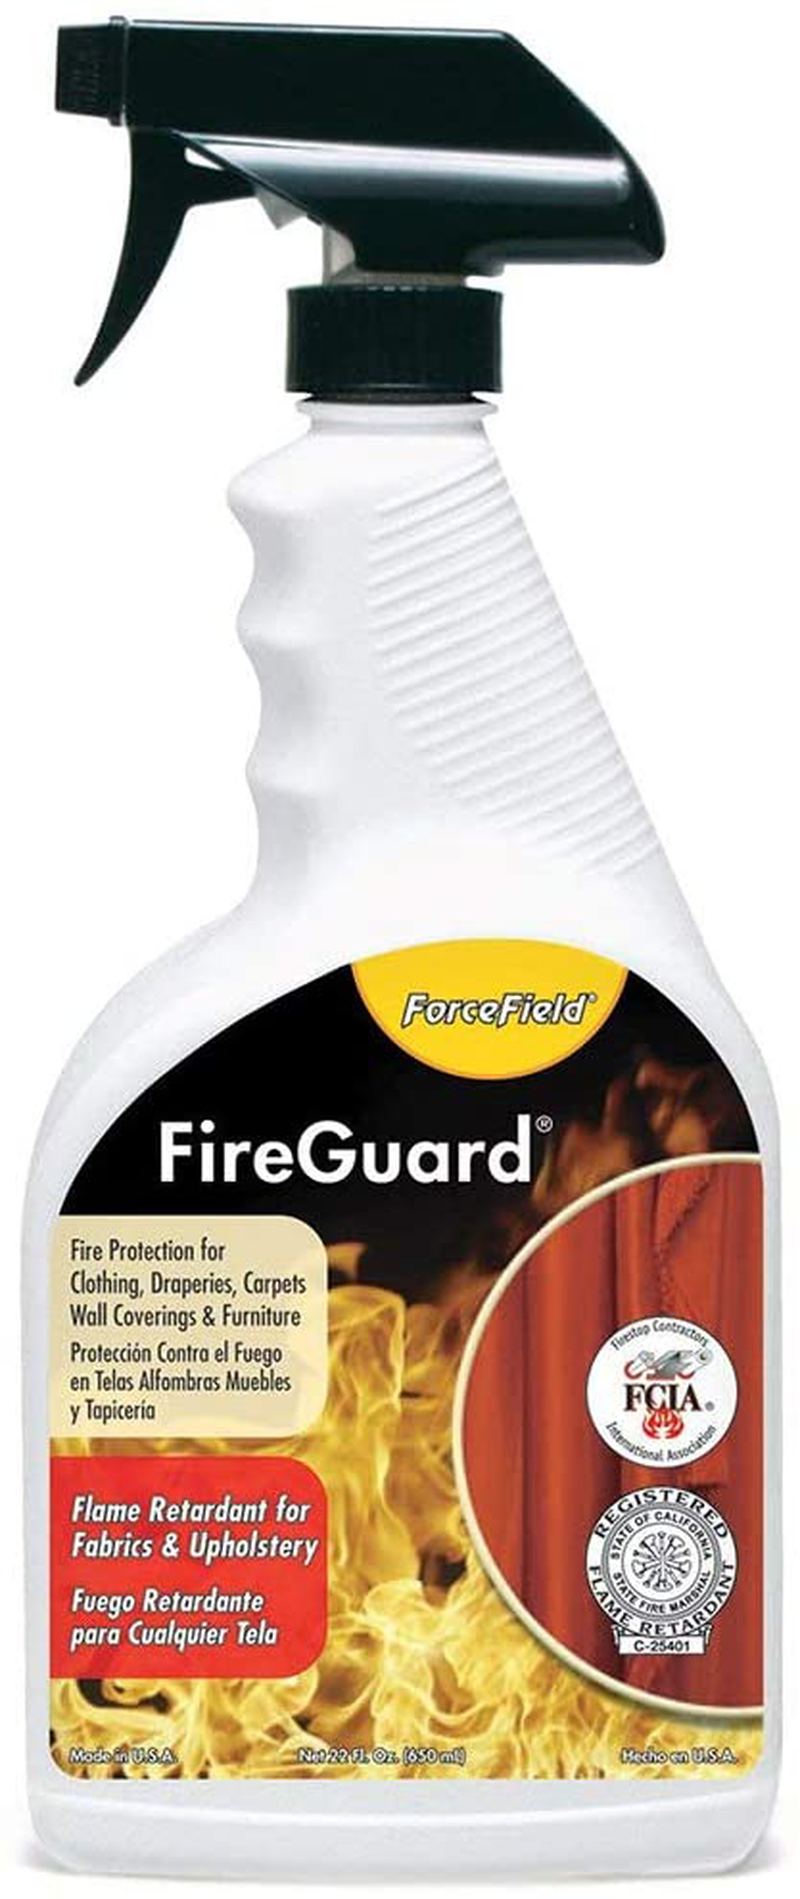 ForceField – FireGuard – Flame Retardant and Protection, 22 oz (650 ml)